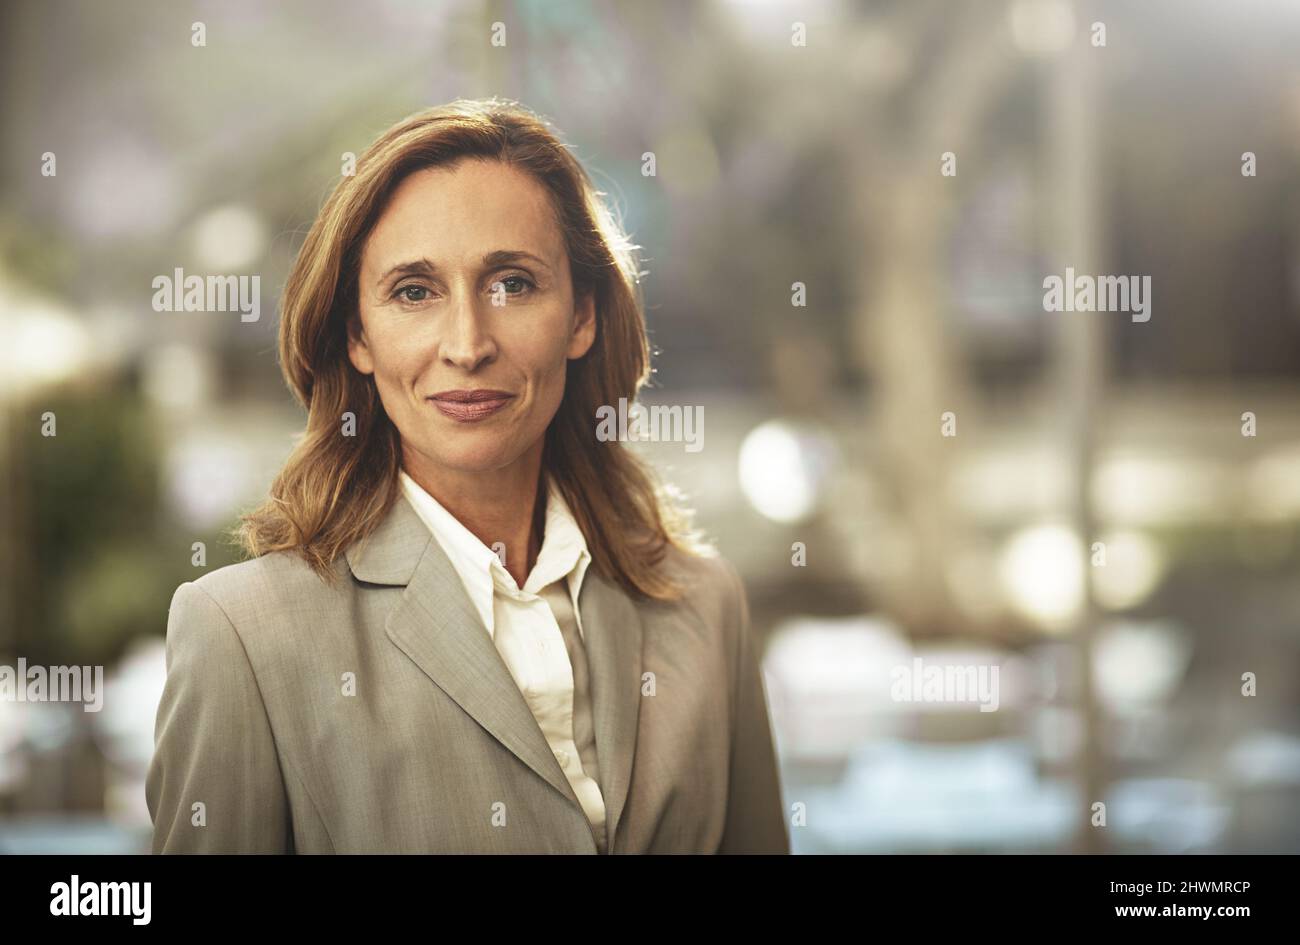 Time ti get back to business. Cropped portrait of a businesswoman standing outside. Stock Photo